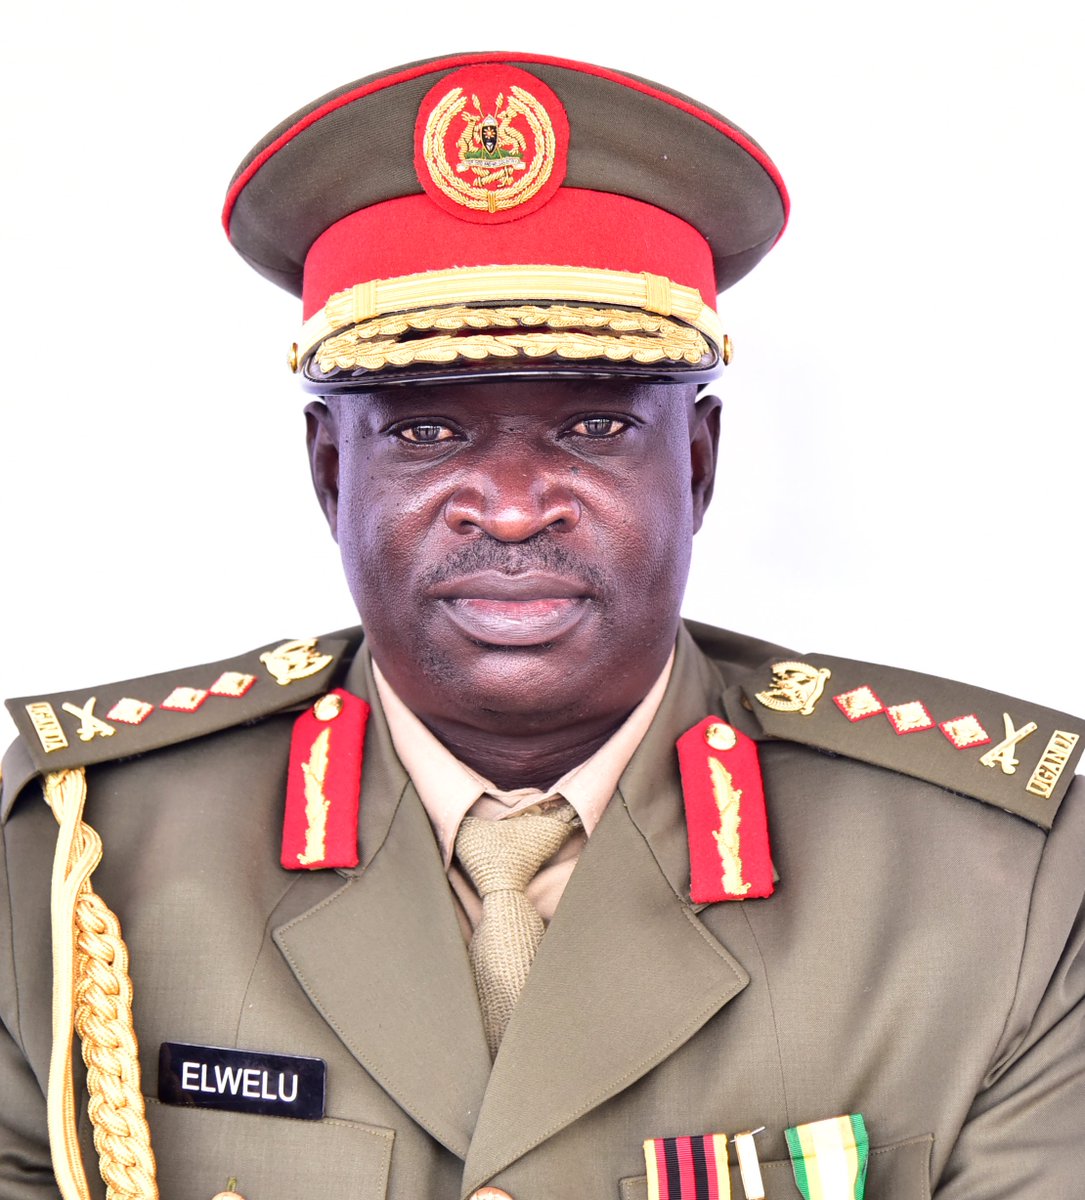 #KnowYourMP Name: Hon. Peter Elwelu (Lt Gen.) Constituency: UPDF Representative Profession: Military Political Party: None #11thParliament